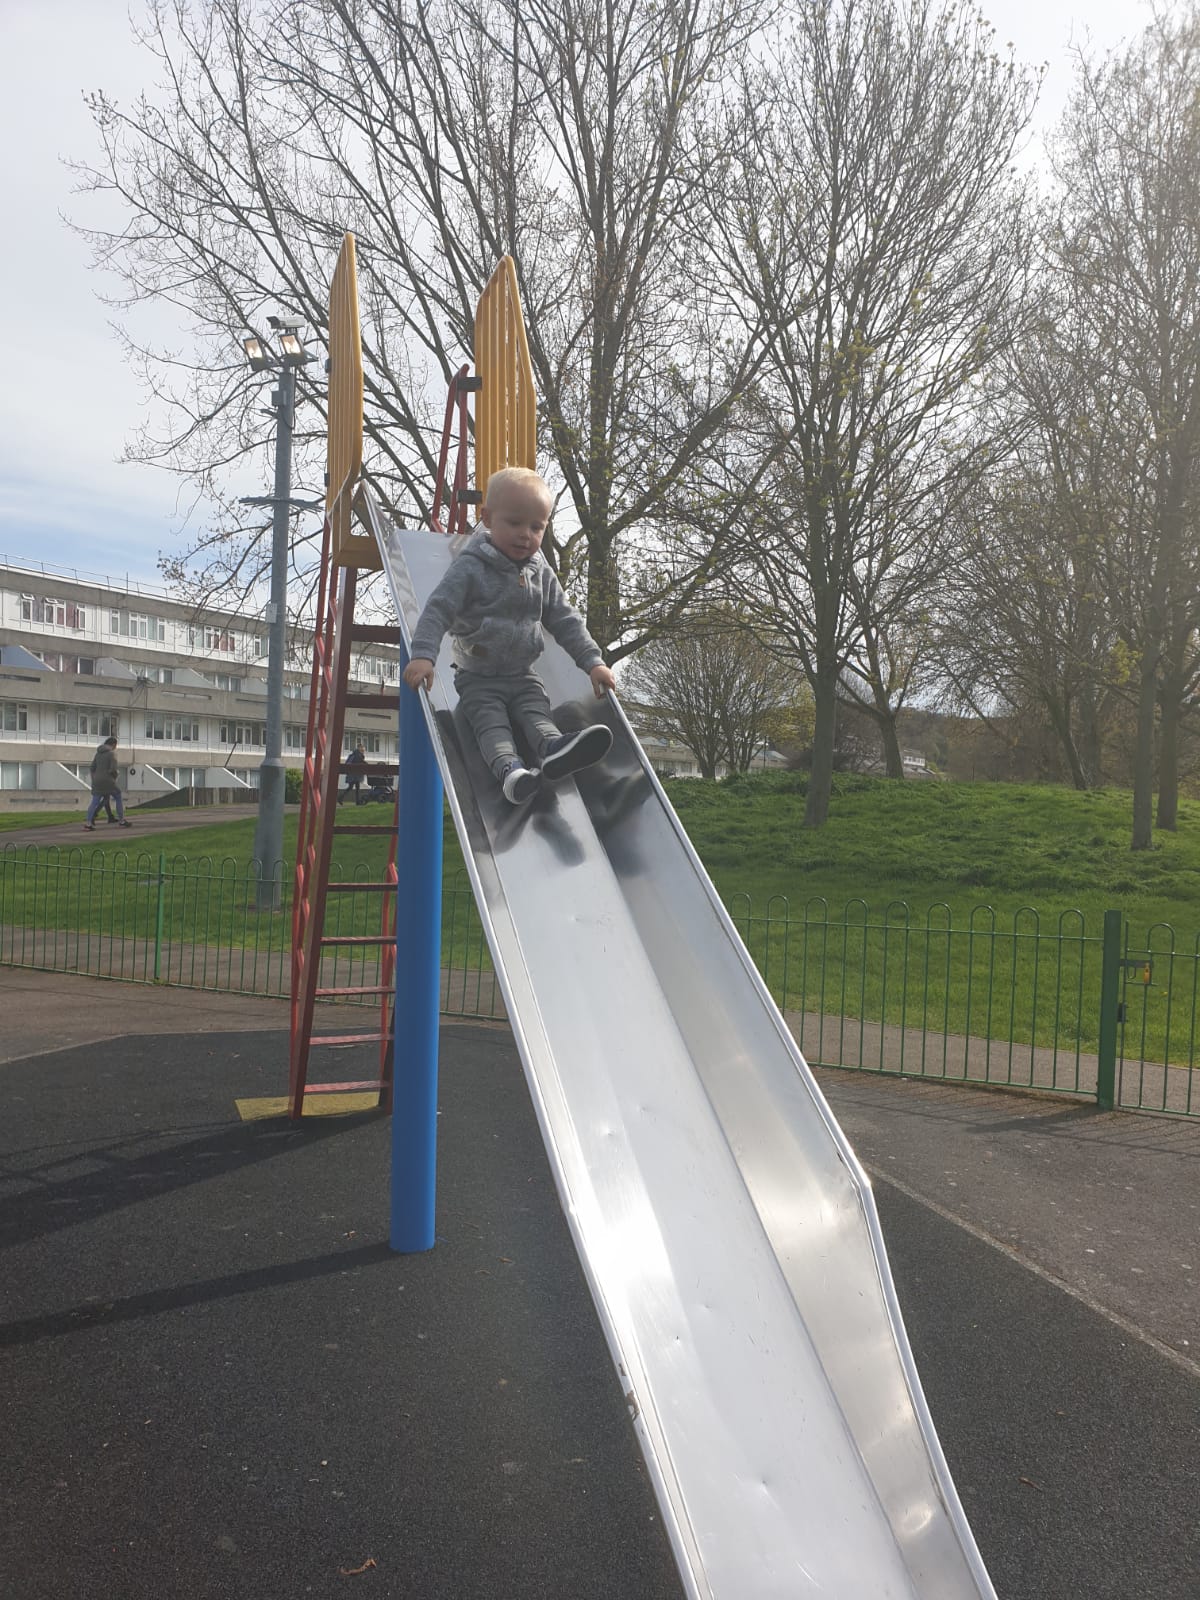 Child playing on a slide